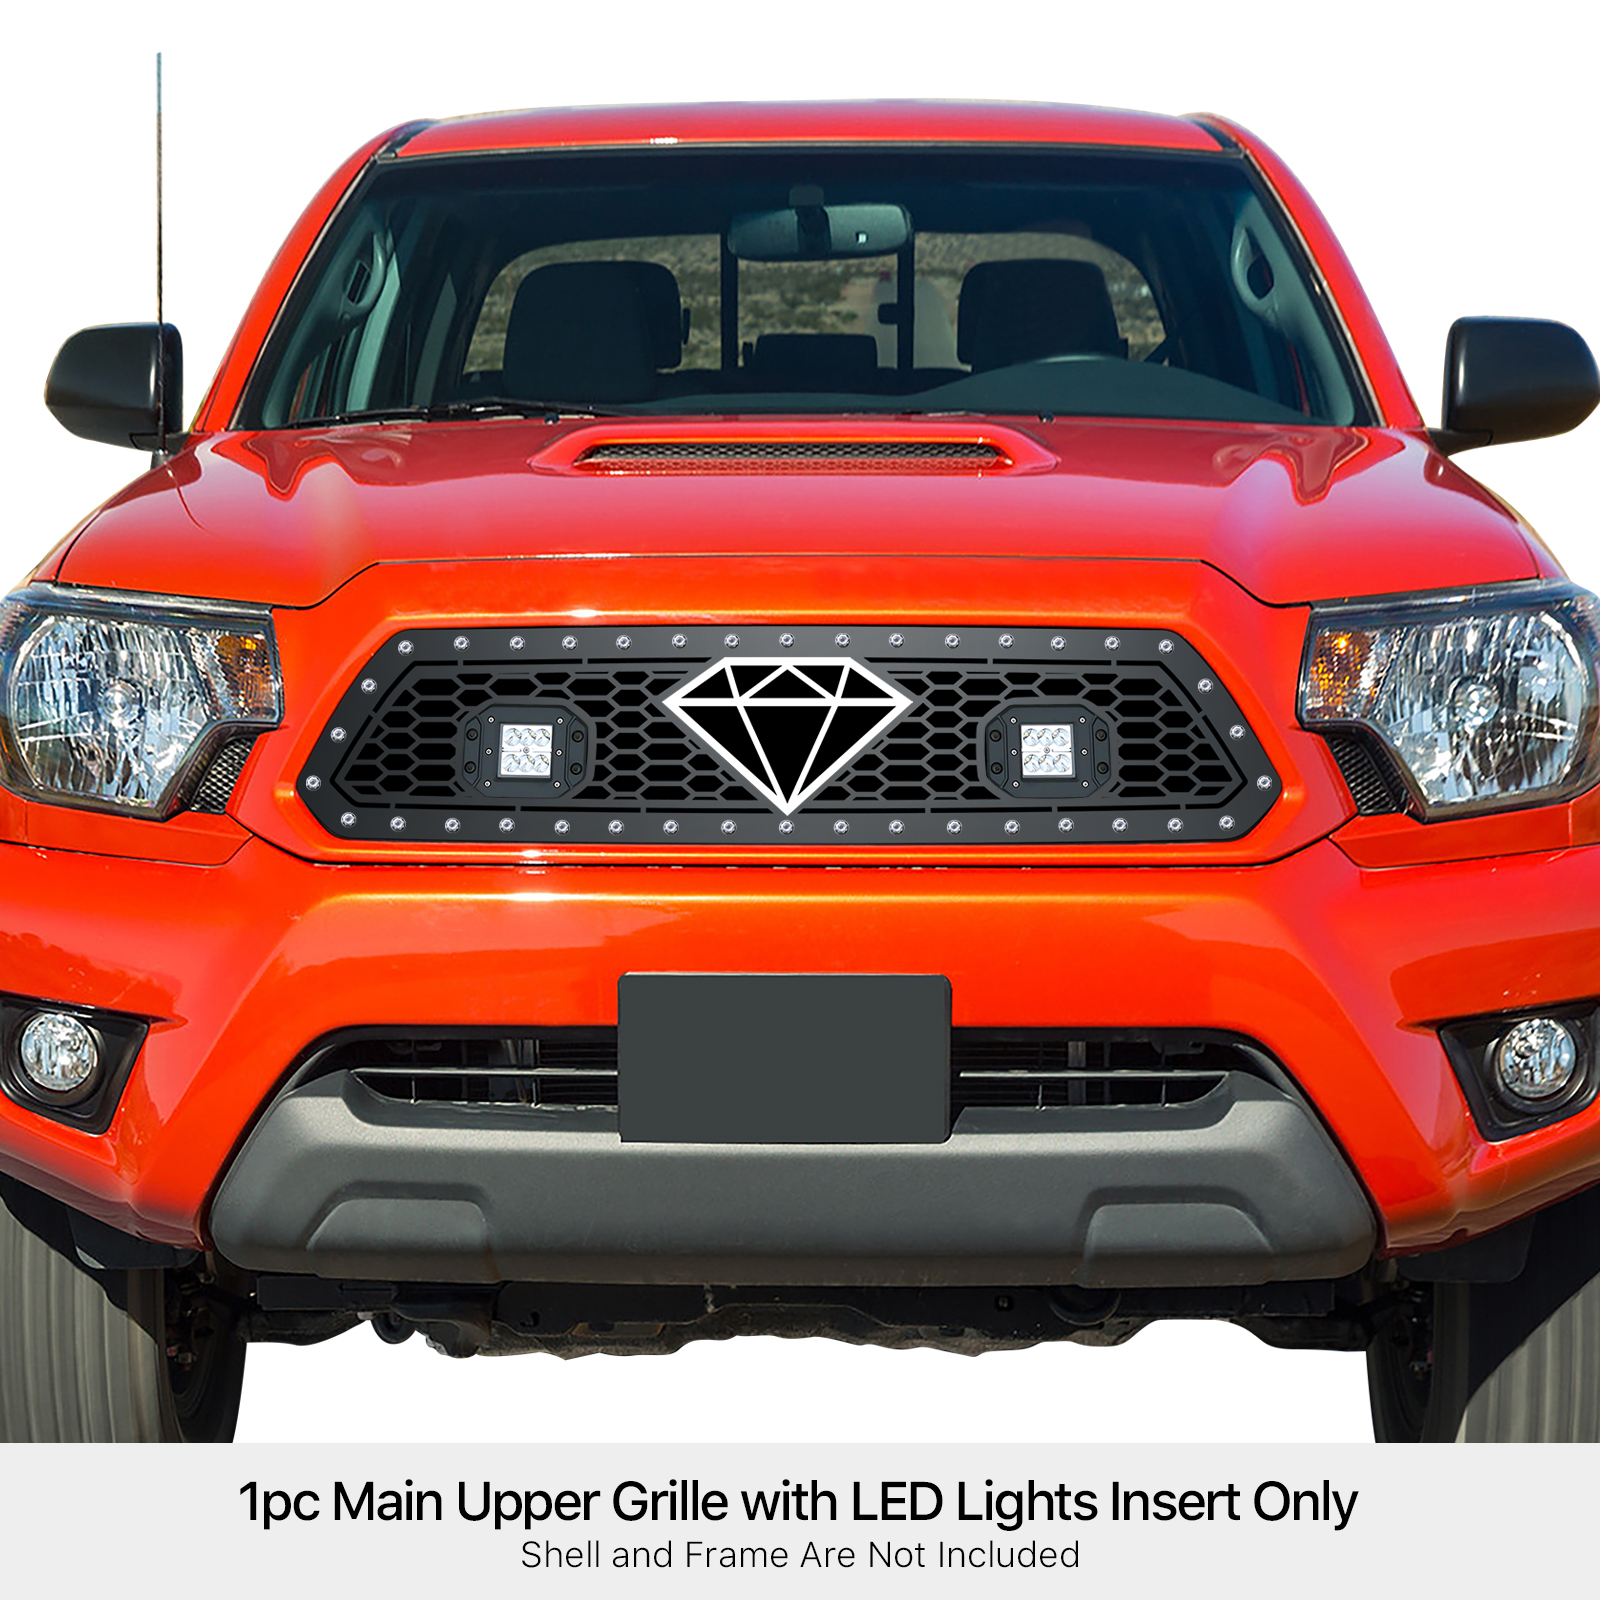 2012-2015 Toyota   Tacoma MAIN UPPER Sheet Grille